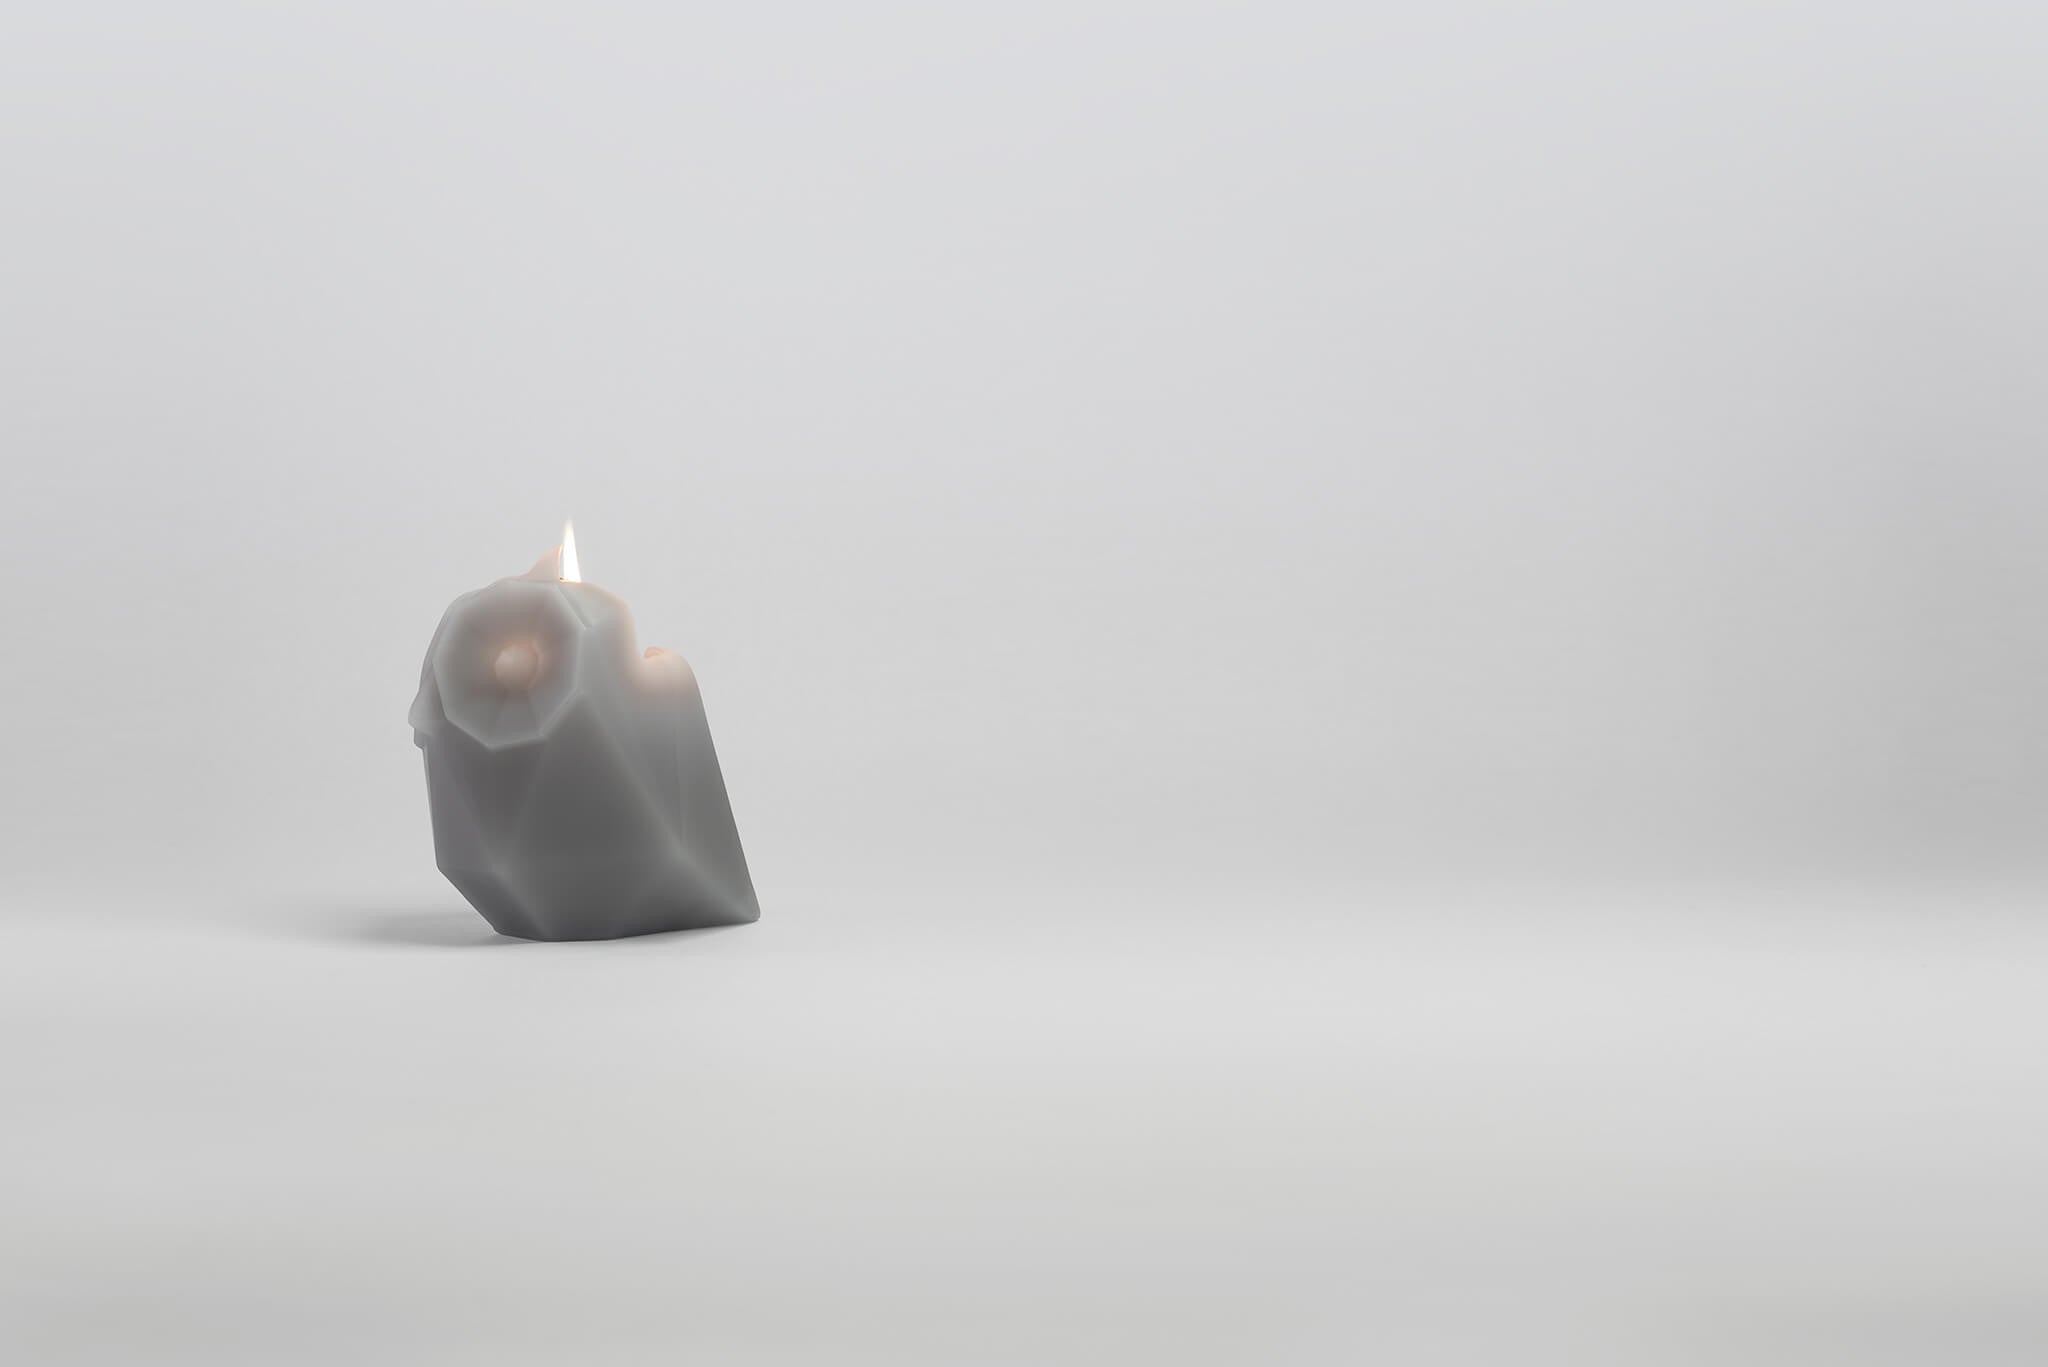 Melting grey owl shaped pyropet candle reveals a surprise after it is lit. Pefect gift for owl lovers. 